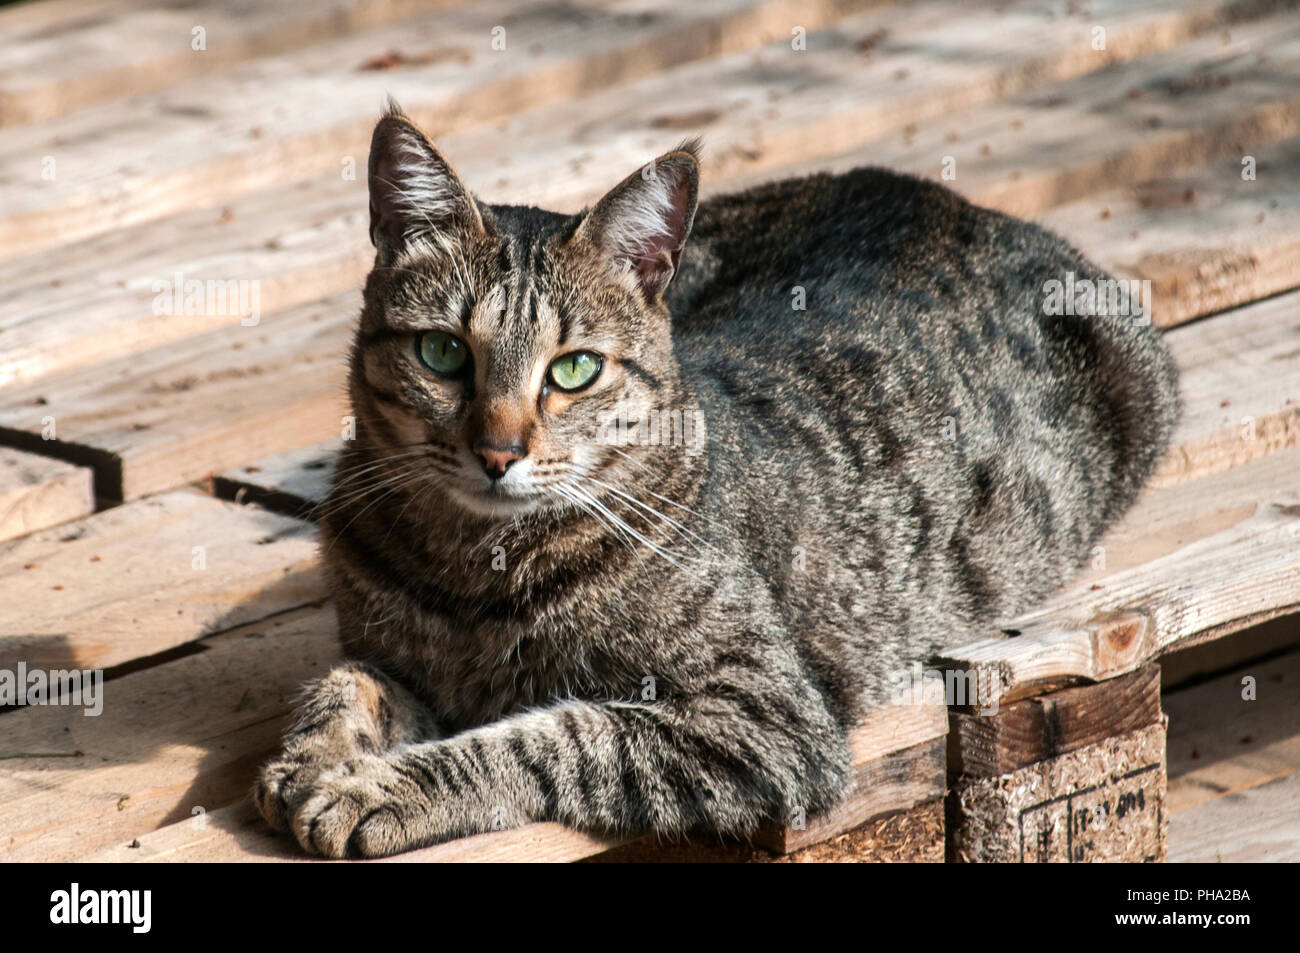 Male gray tabby cat resting on wooden boards floor outdoors Stock Photo